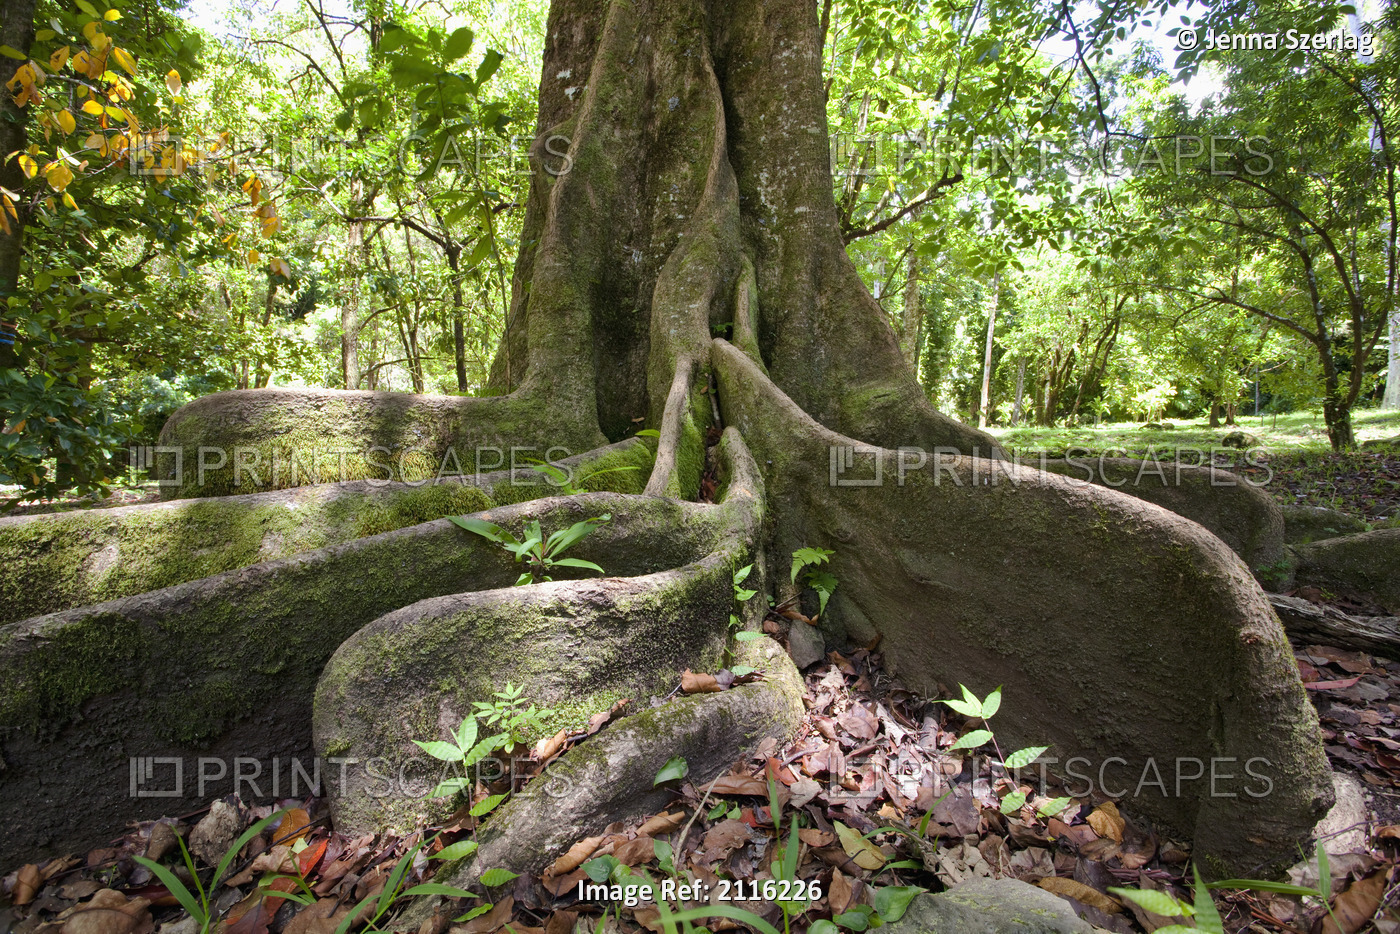 Hawaii, Maui, Keanae, An old tree with large roots.